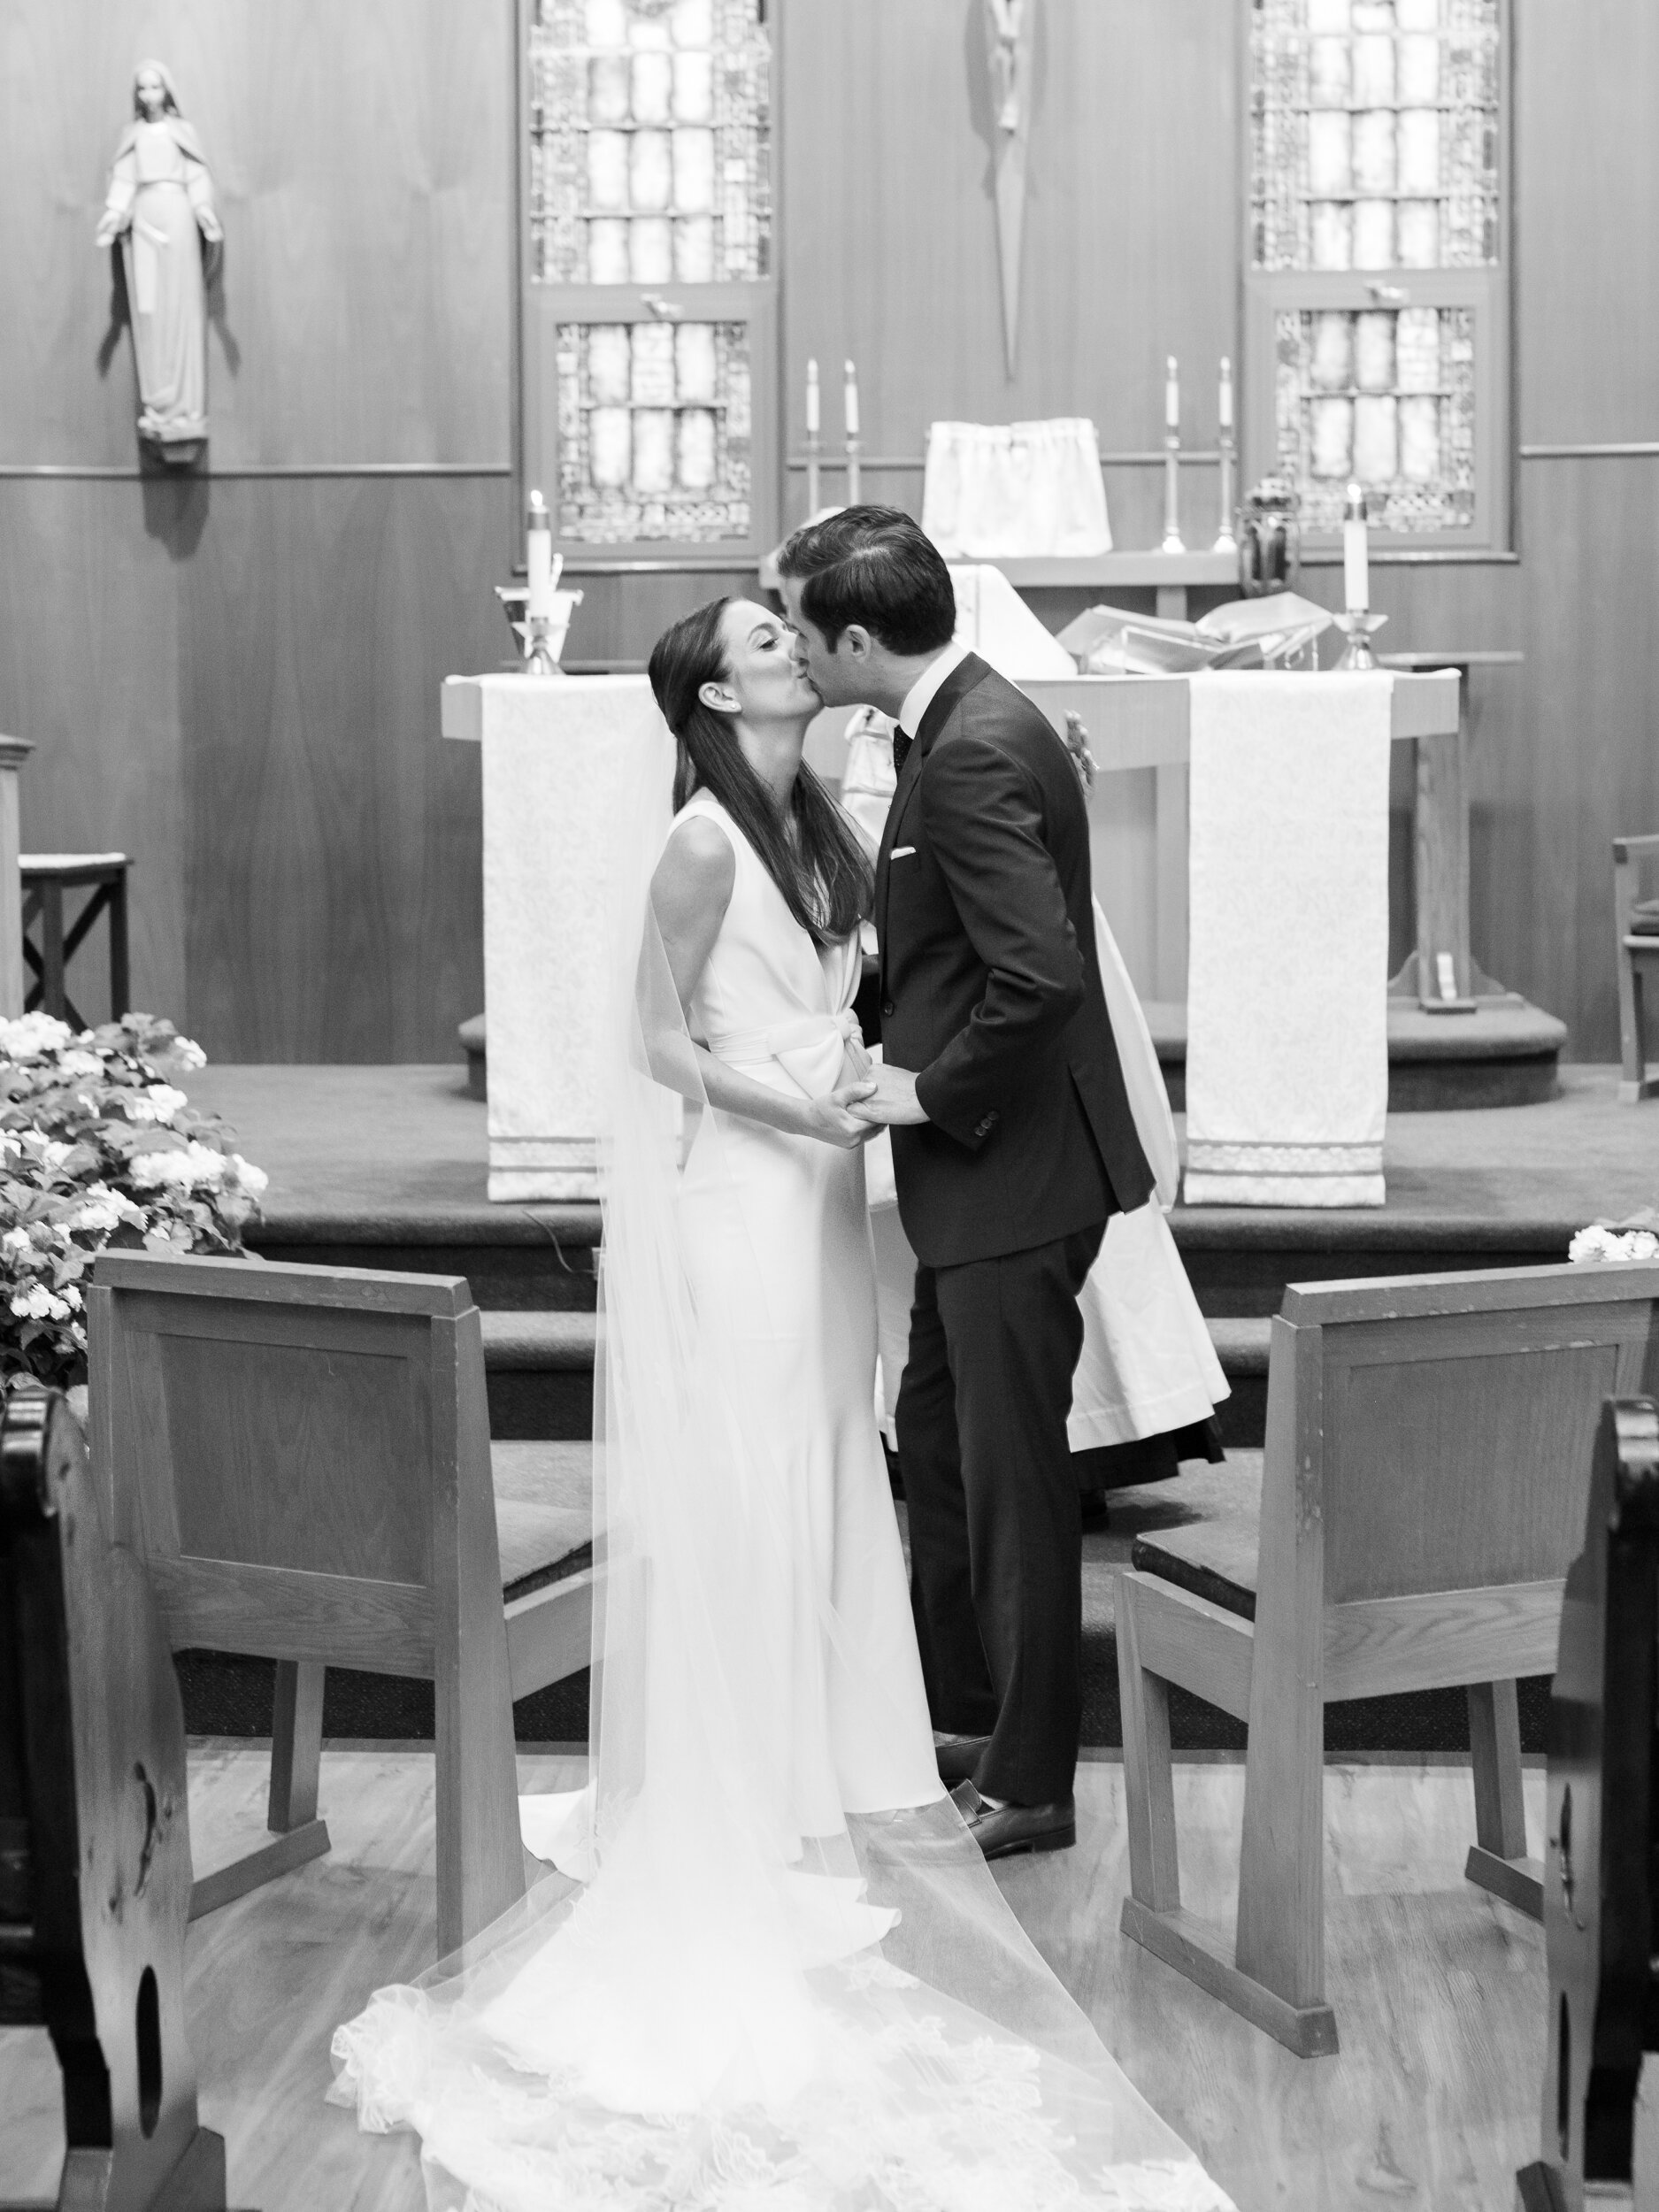 Bride and Groom Kiss at Church Ceremony in The Hamptons